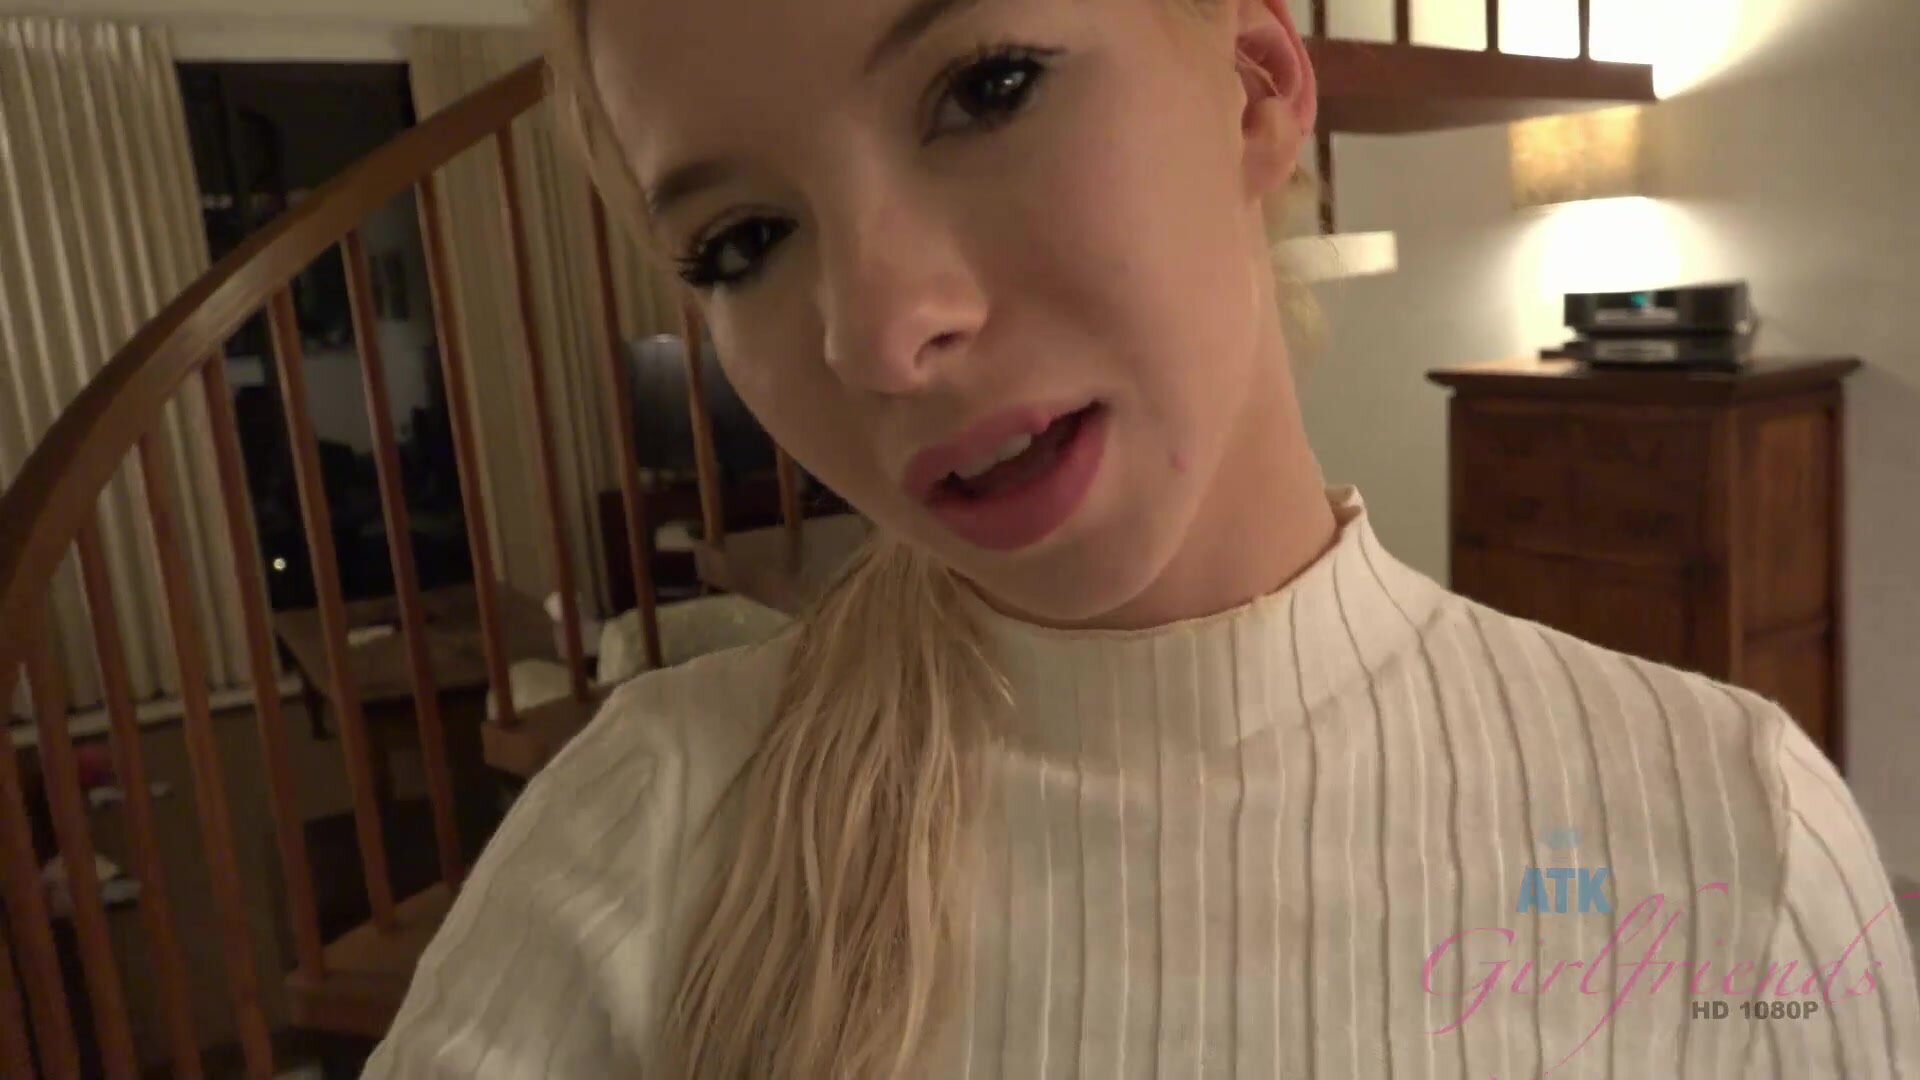 Kenzie Reeves - Kenzie Wants You Alone In Your Room